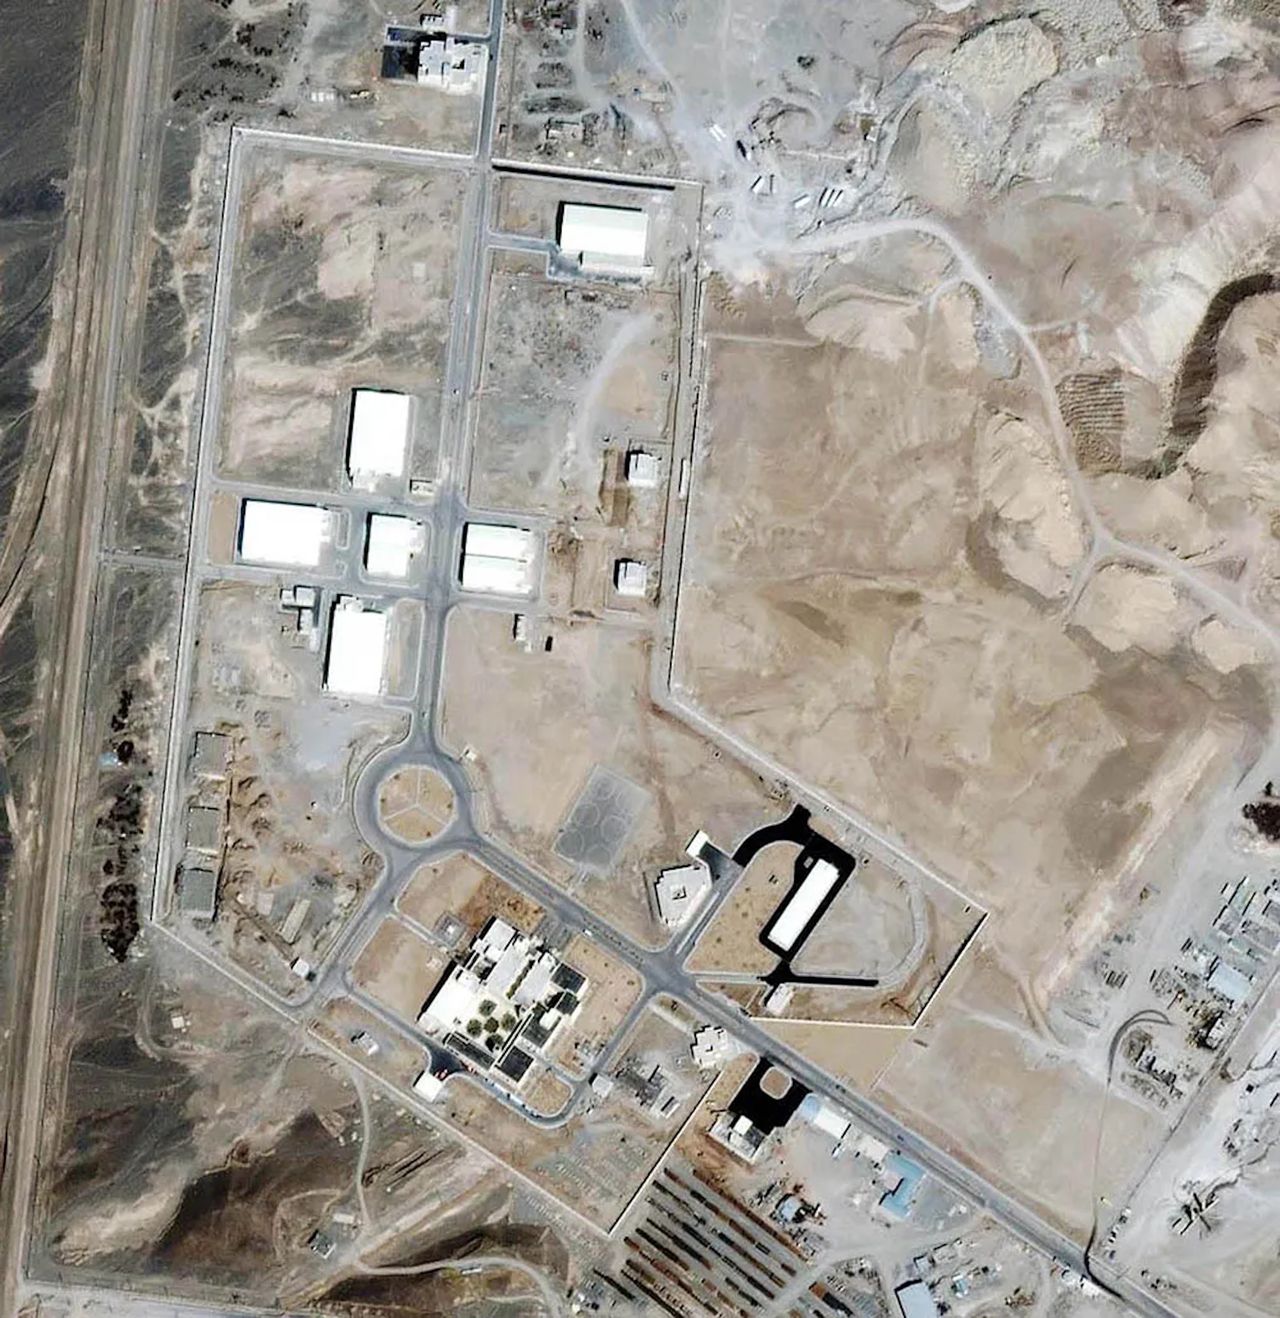 One of the goals of Stuxnet was supposed to be the Iranian nuclear facilities in Natanz.